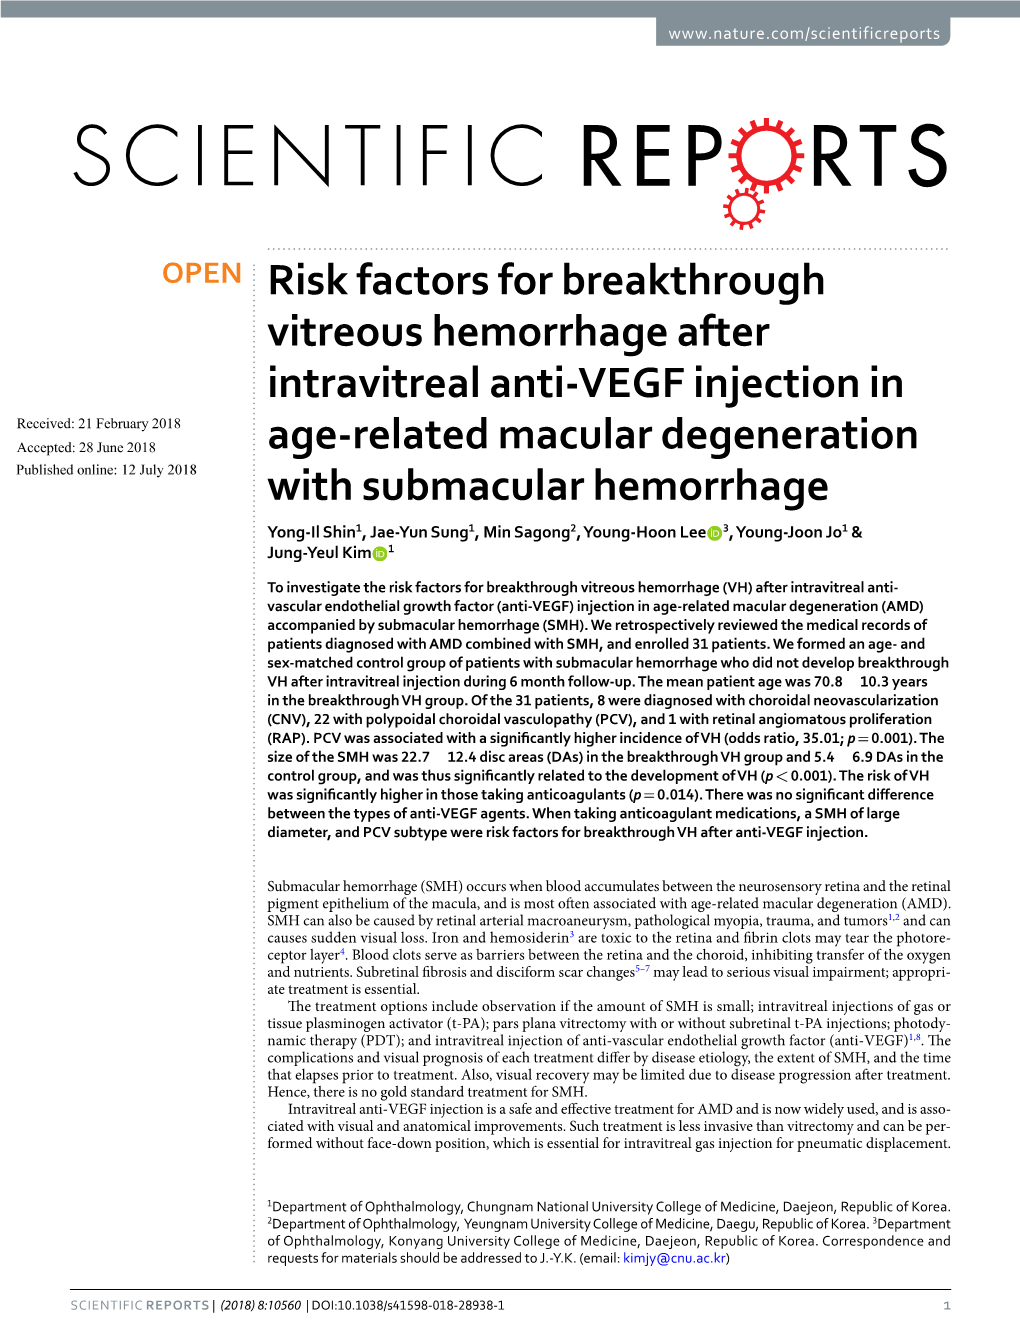 Risk Factors for Breakthrough Vitreous Hemorrhage After Intravitreal Anti